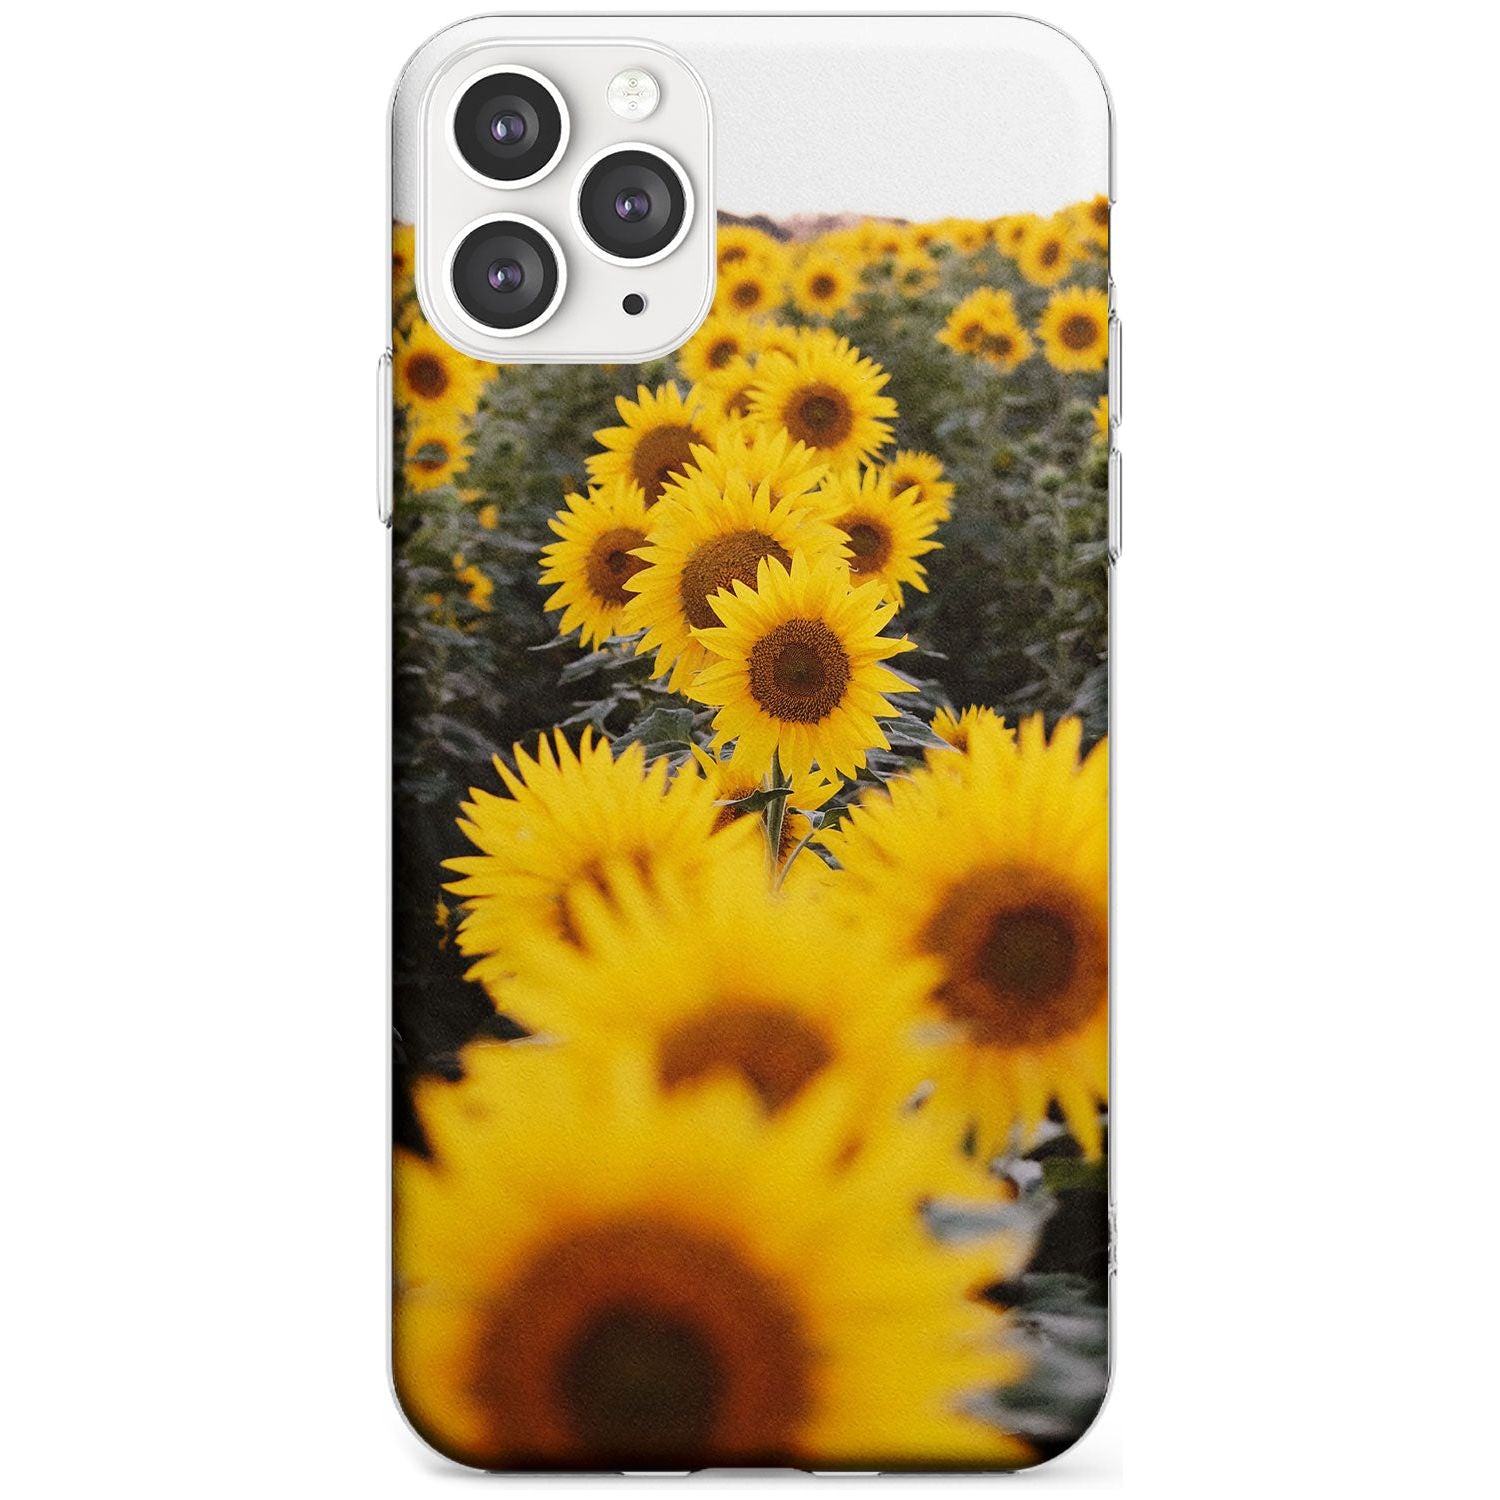 Sunflower Field Photograph Slim TPU Phone Case for iPhone 11 Pro Max